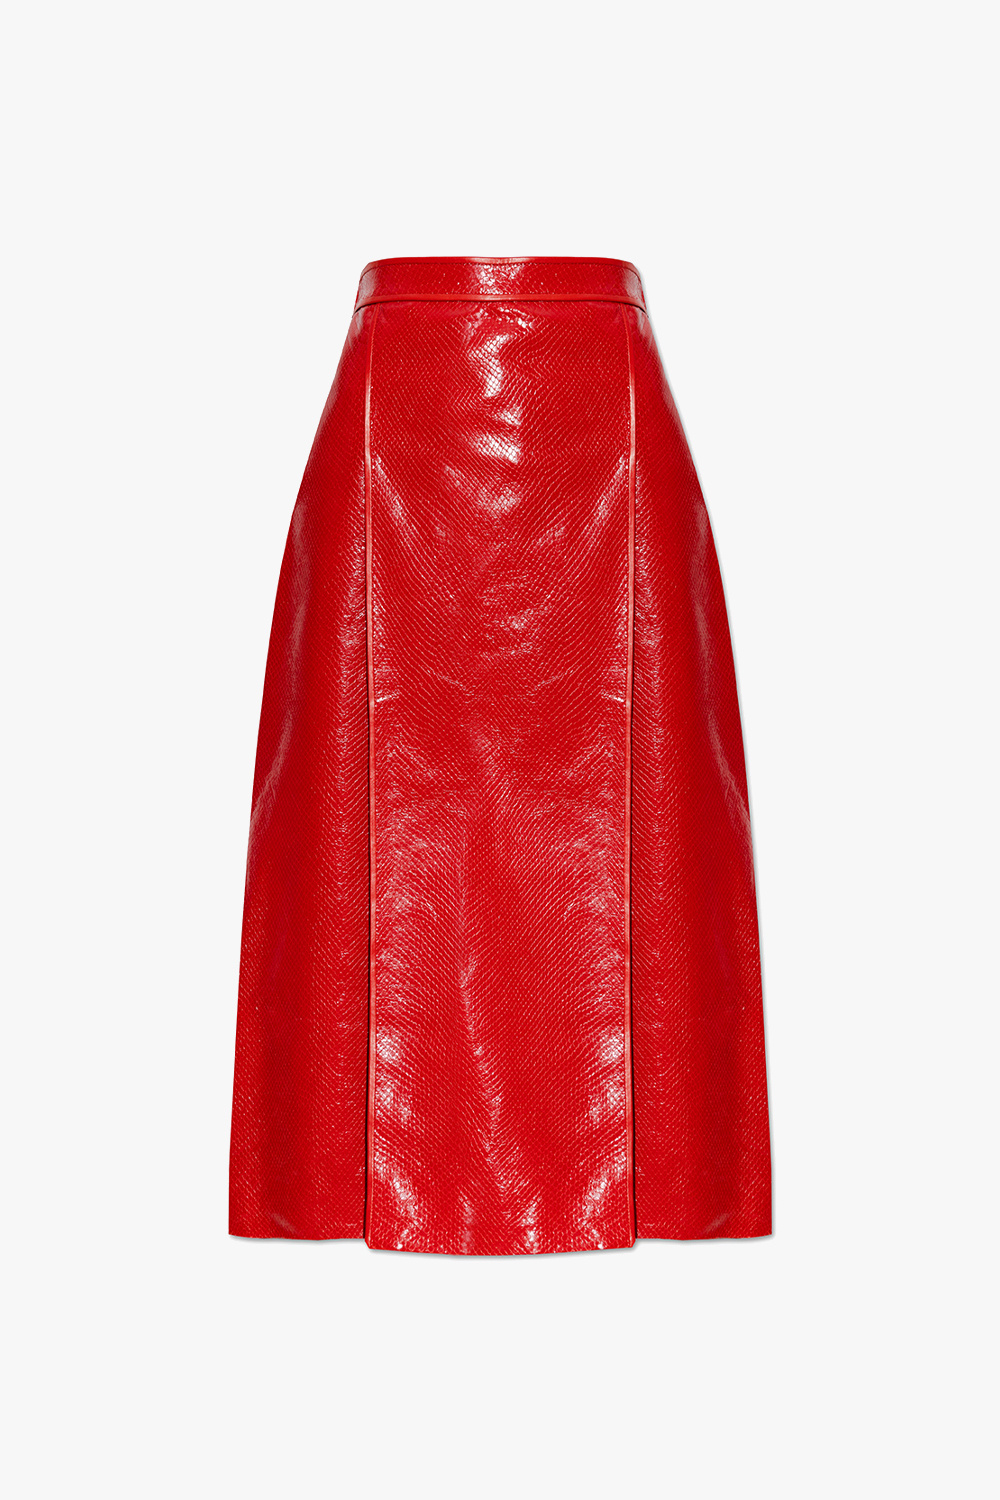 Gucci Leather skirt